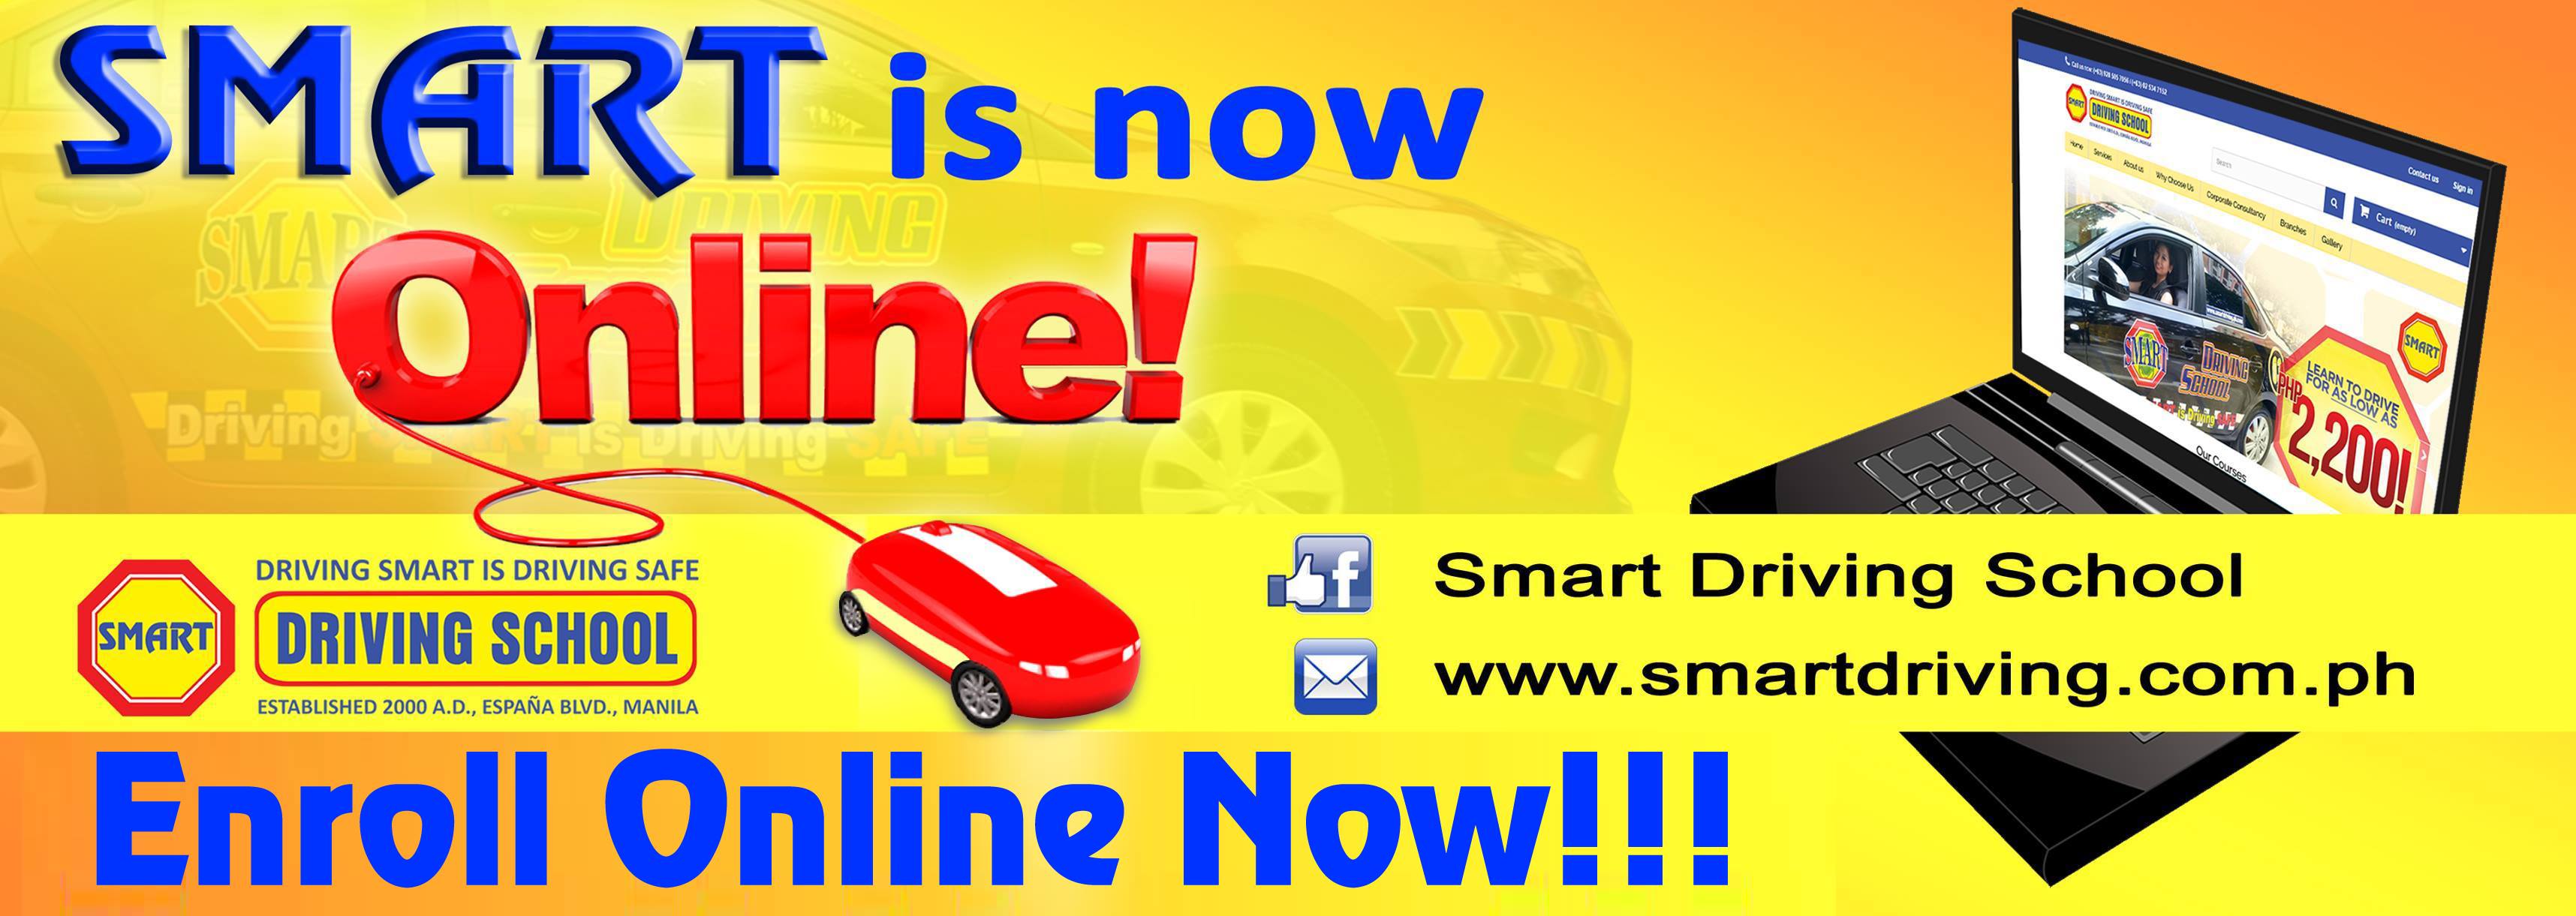 driving school in the philippines - smart